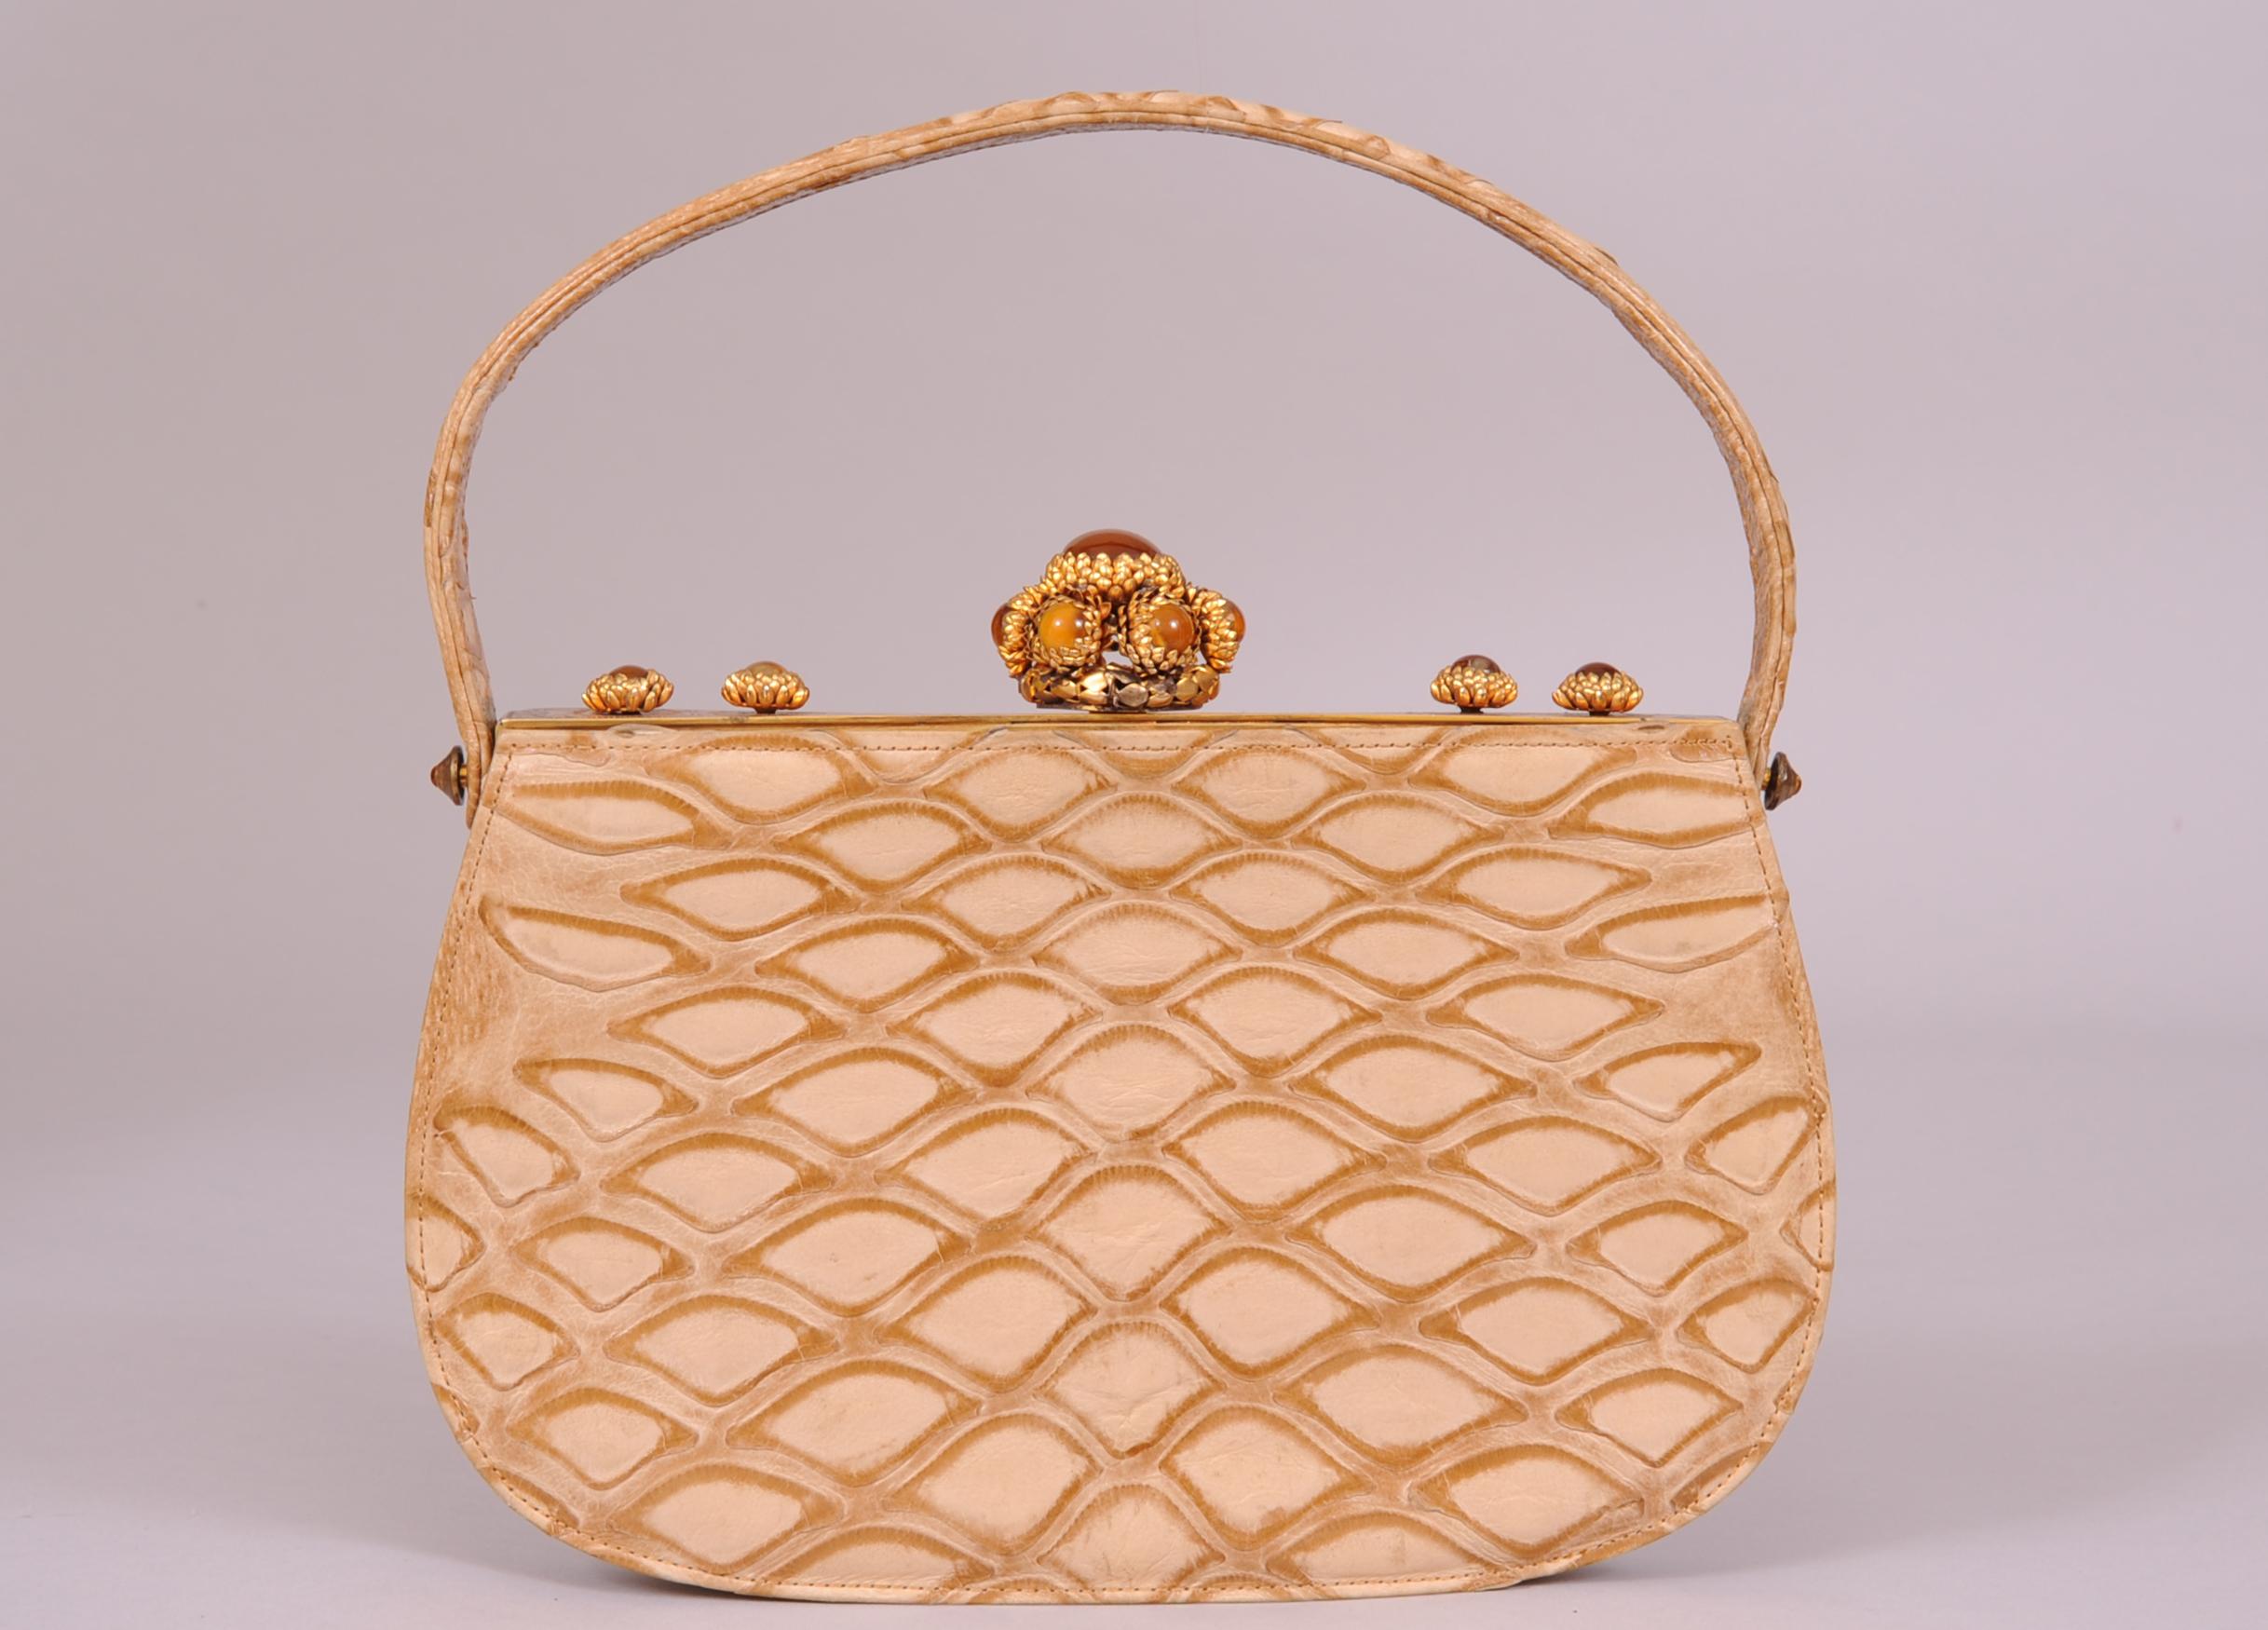 Chic, rare and unusual this striking Koret evening bag has the most eye catching jewelled frame I have ever offered for sale. The gold toned frame has cabochon stones set in gold toned flower shaped petals. There is one large clasp of stones at the